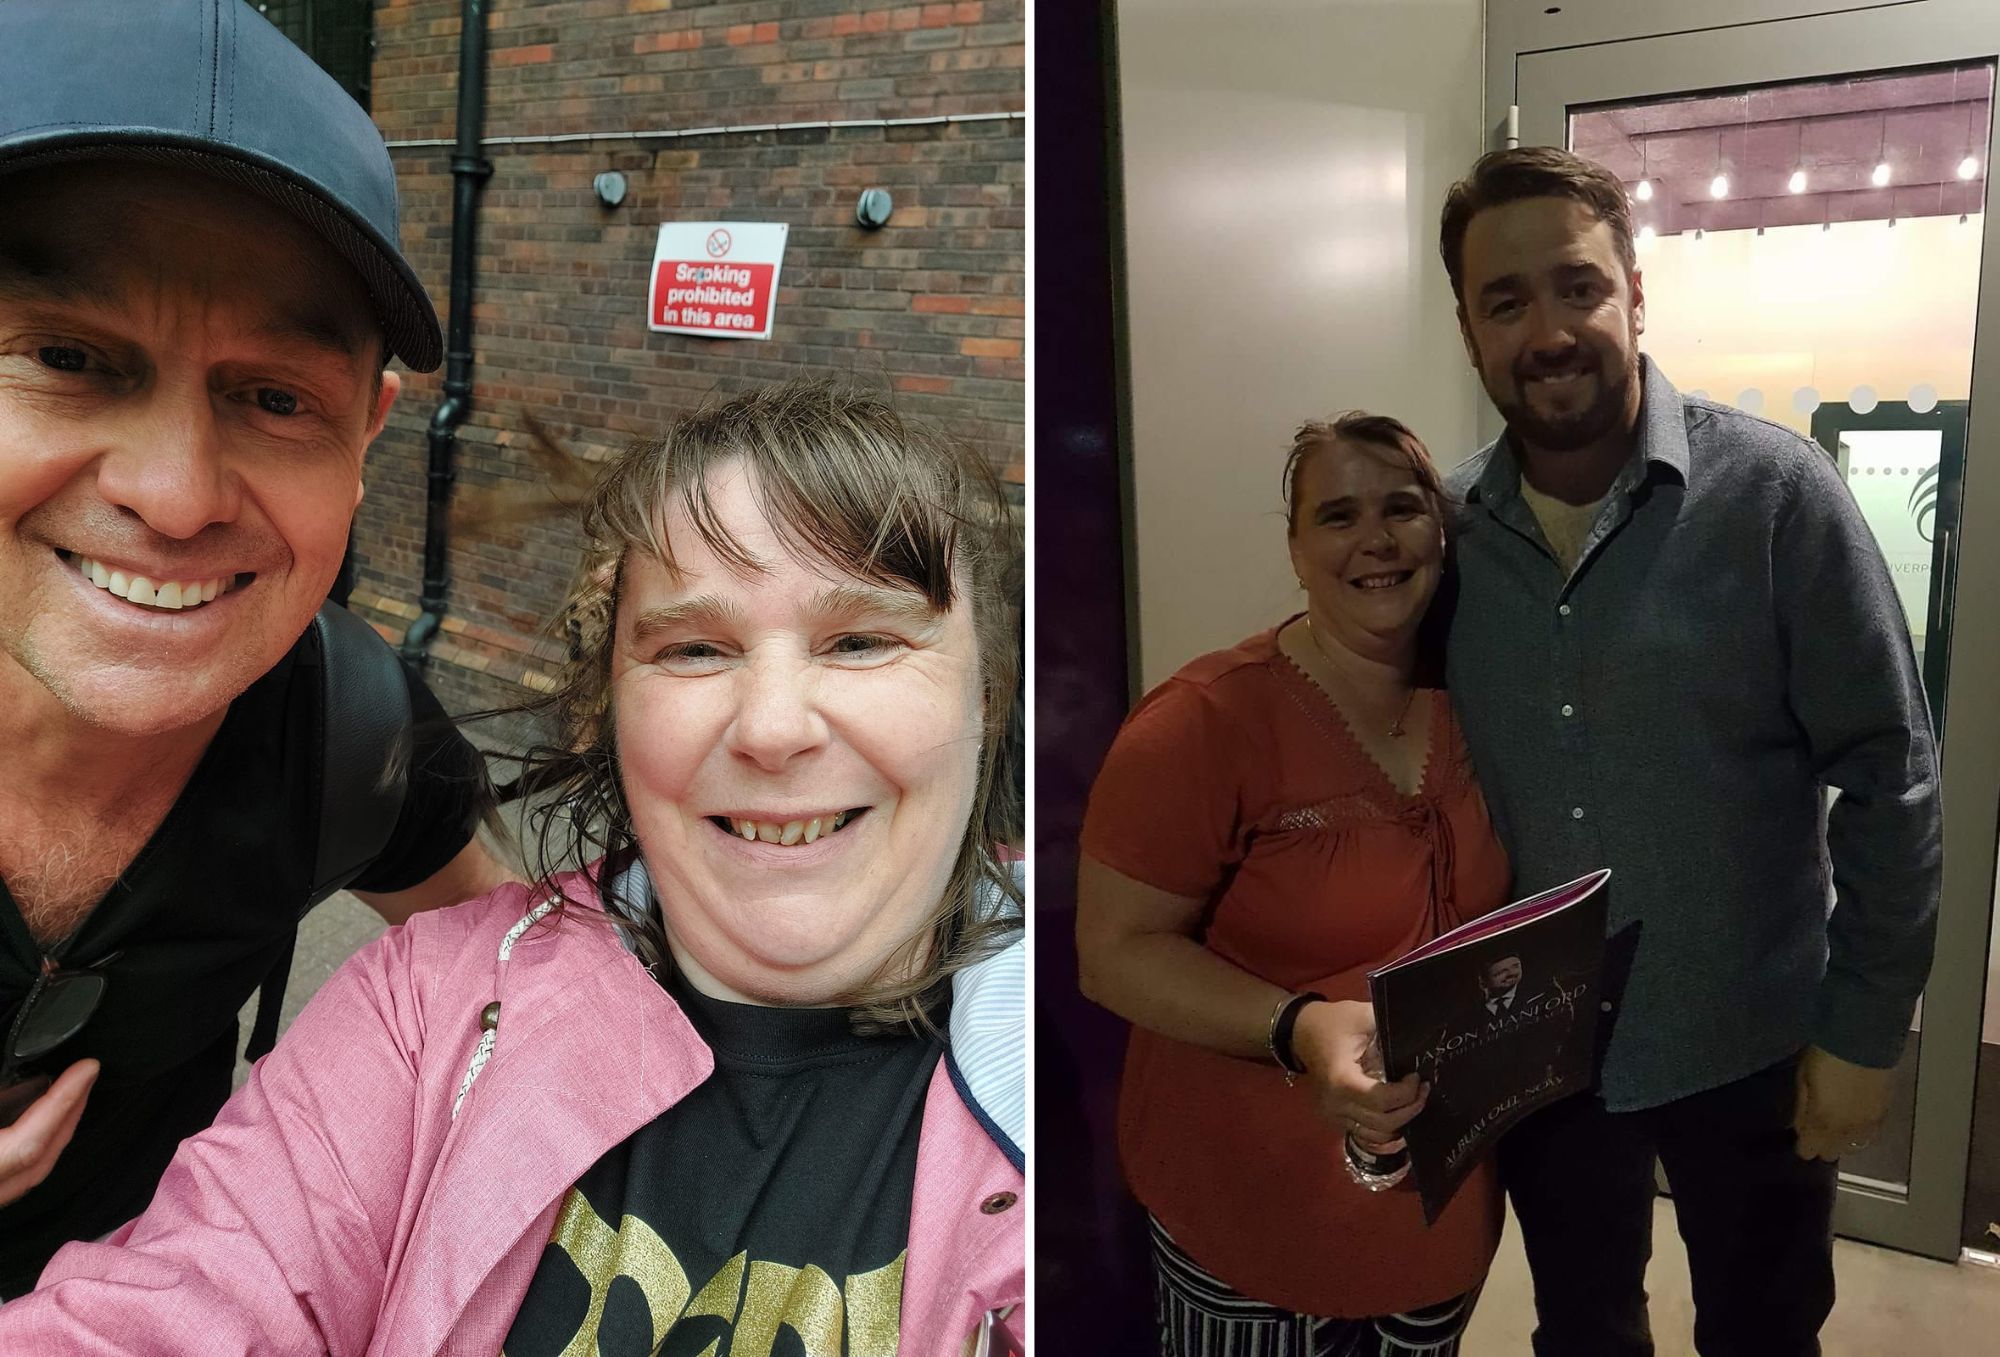 Jennet Curran with two of her favourite celebrity meeting, Jason Donovan and Jason Manford.